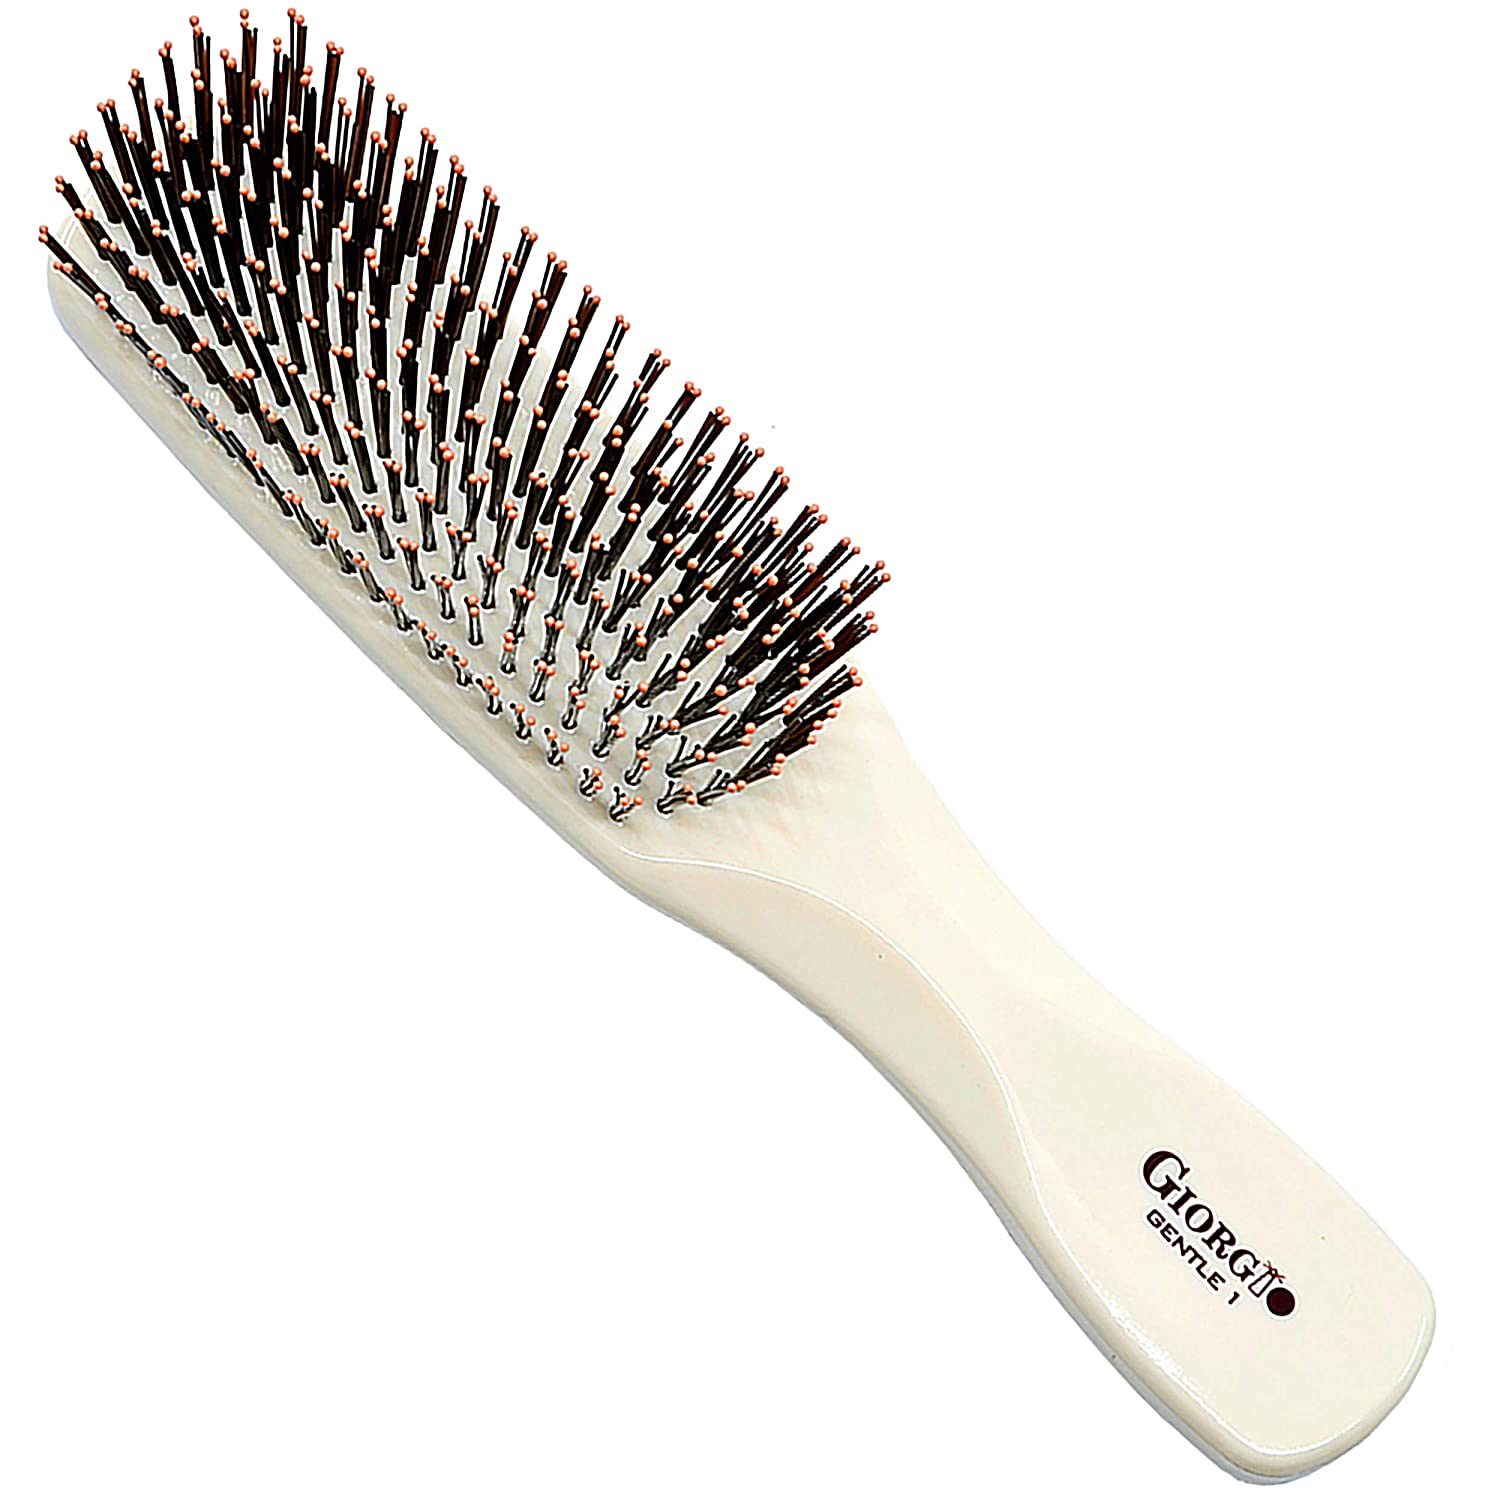 Krago Stylish Hair Brush with Soft Touch Coating - White Gold Series